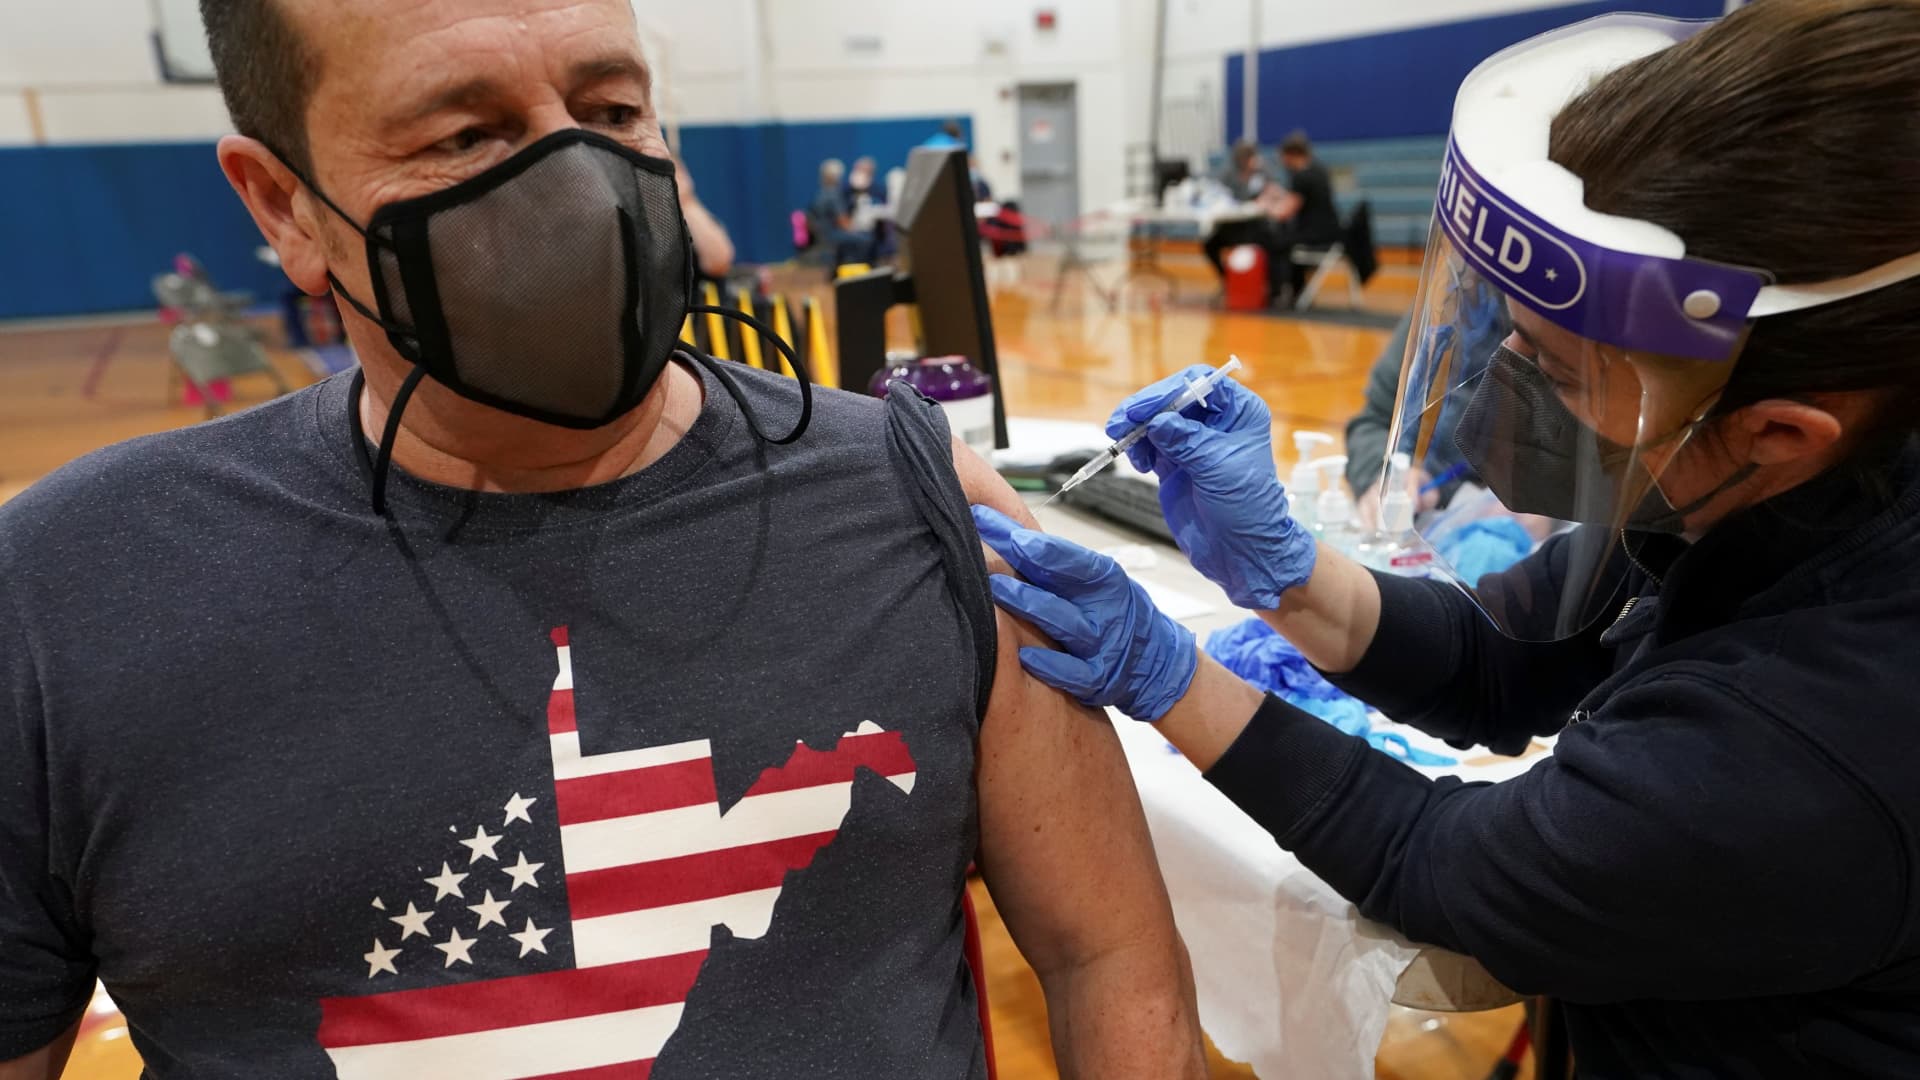 Tony Heaton of Falling Waters, wearing a West Virginia t-shirt with stars and stripes, receives a coronavirus disease (COVID-19) vaccine during a community vaccination event in Martinsburg, West Virginia, March 11, 2021.